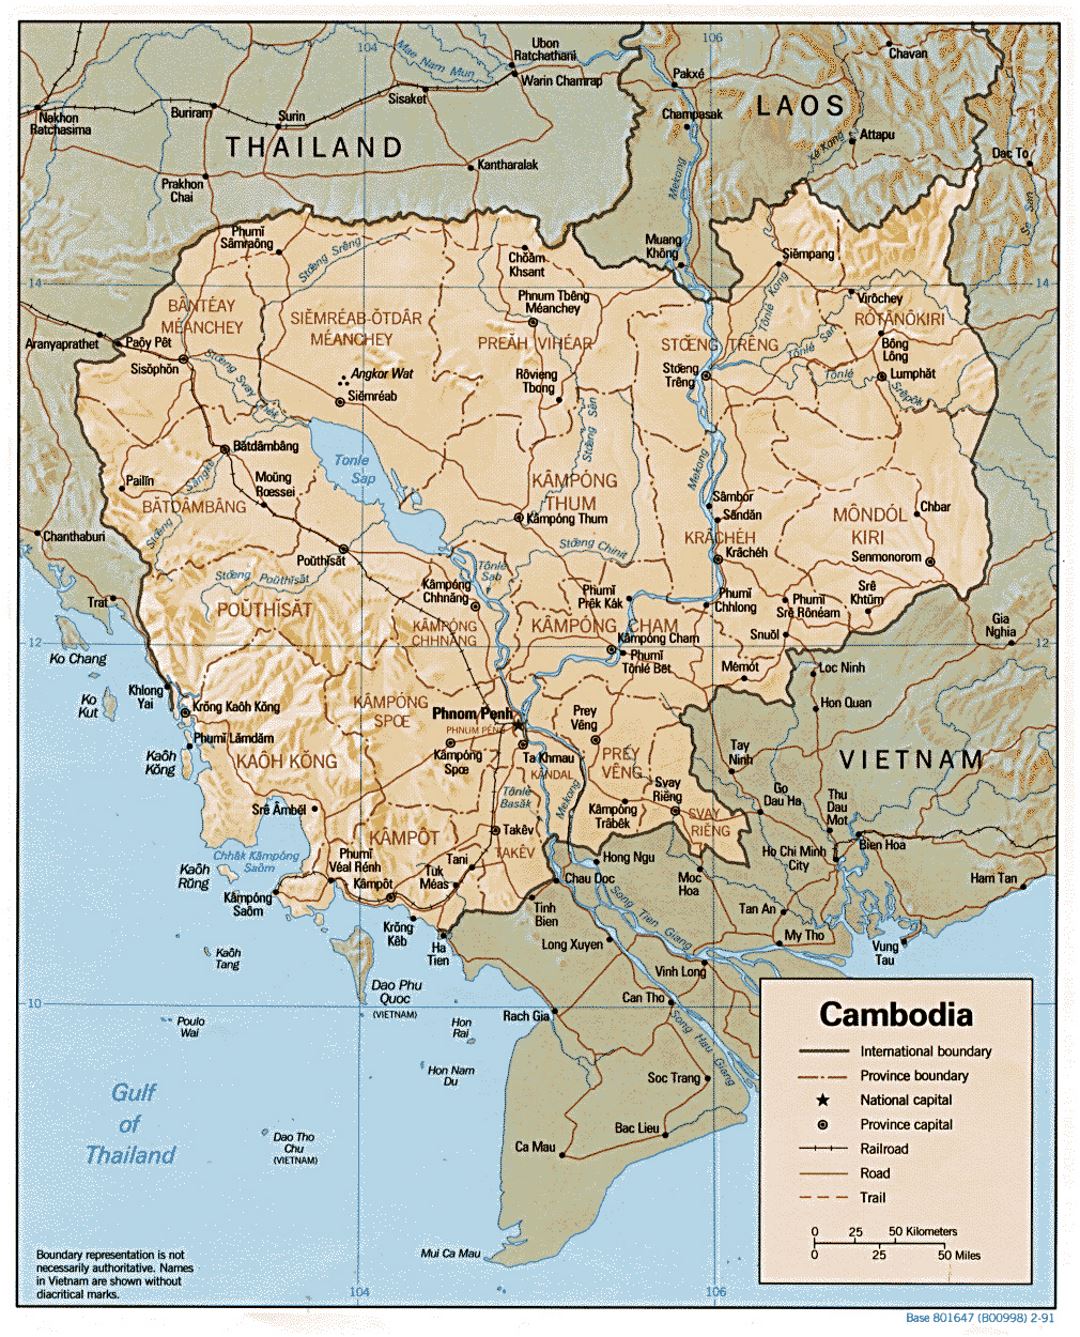 Detailed political and administrative map of Cambodia with relief, roads, railroads and major cities - 1991